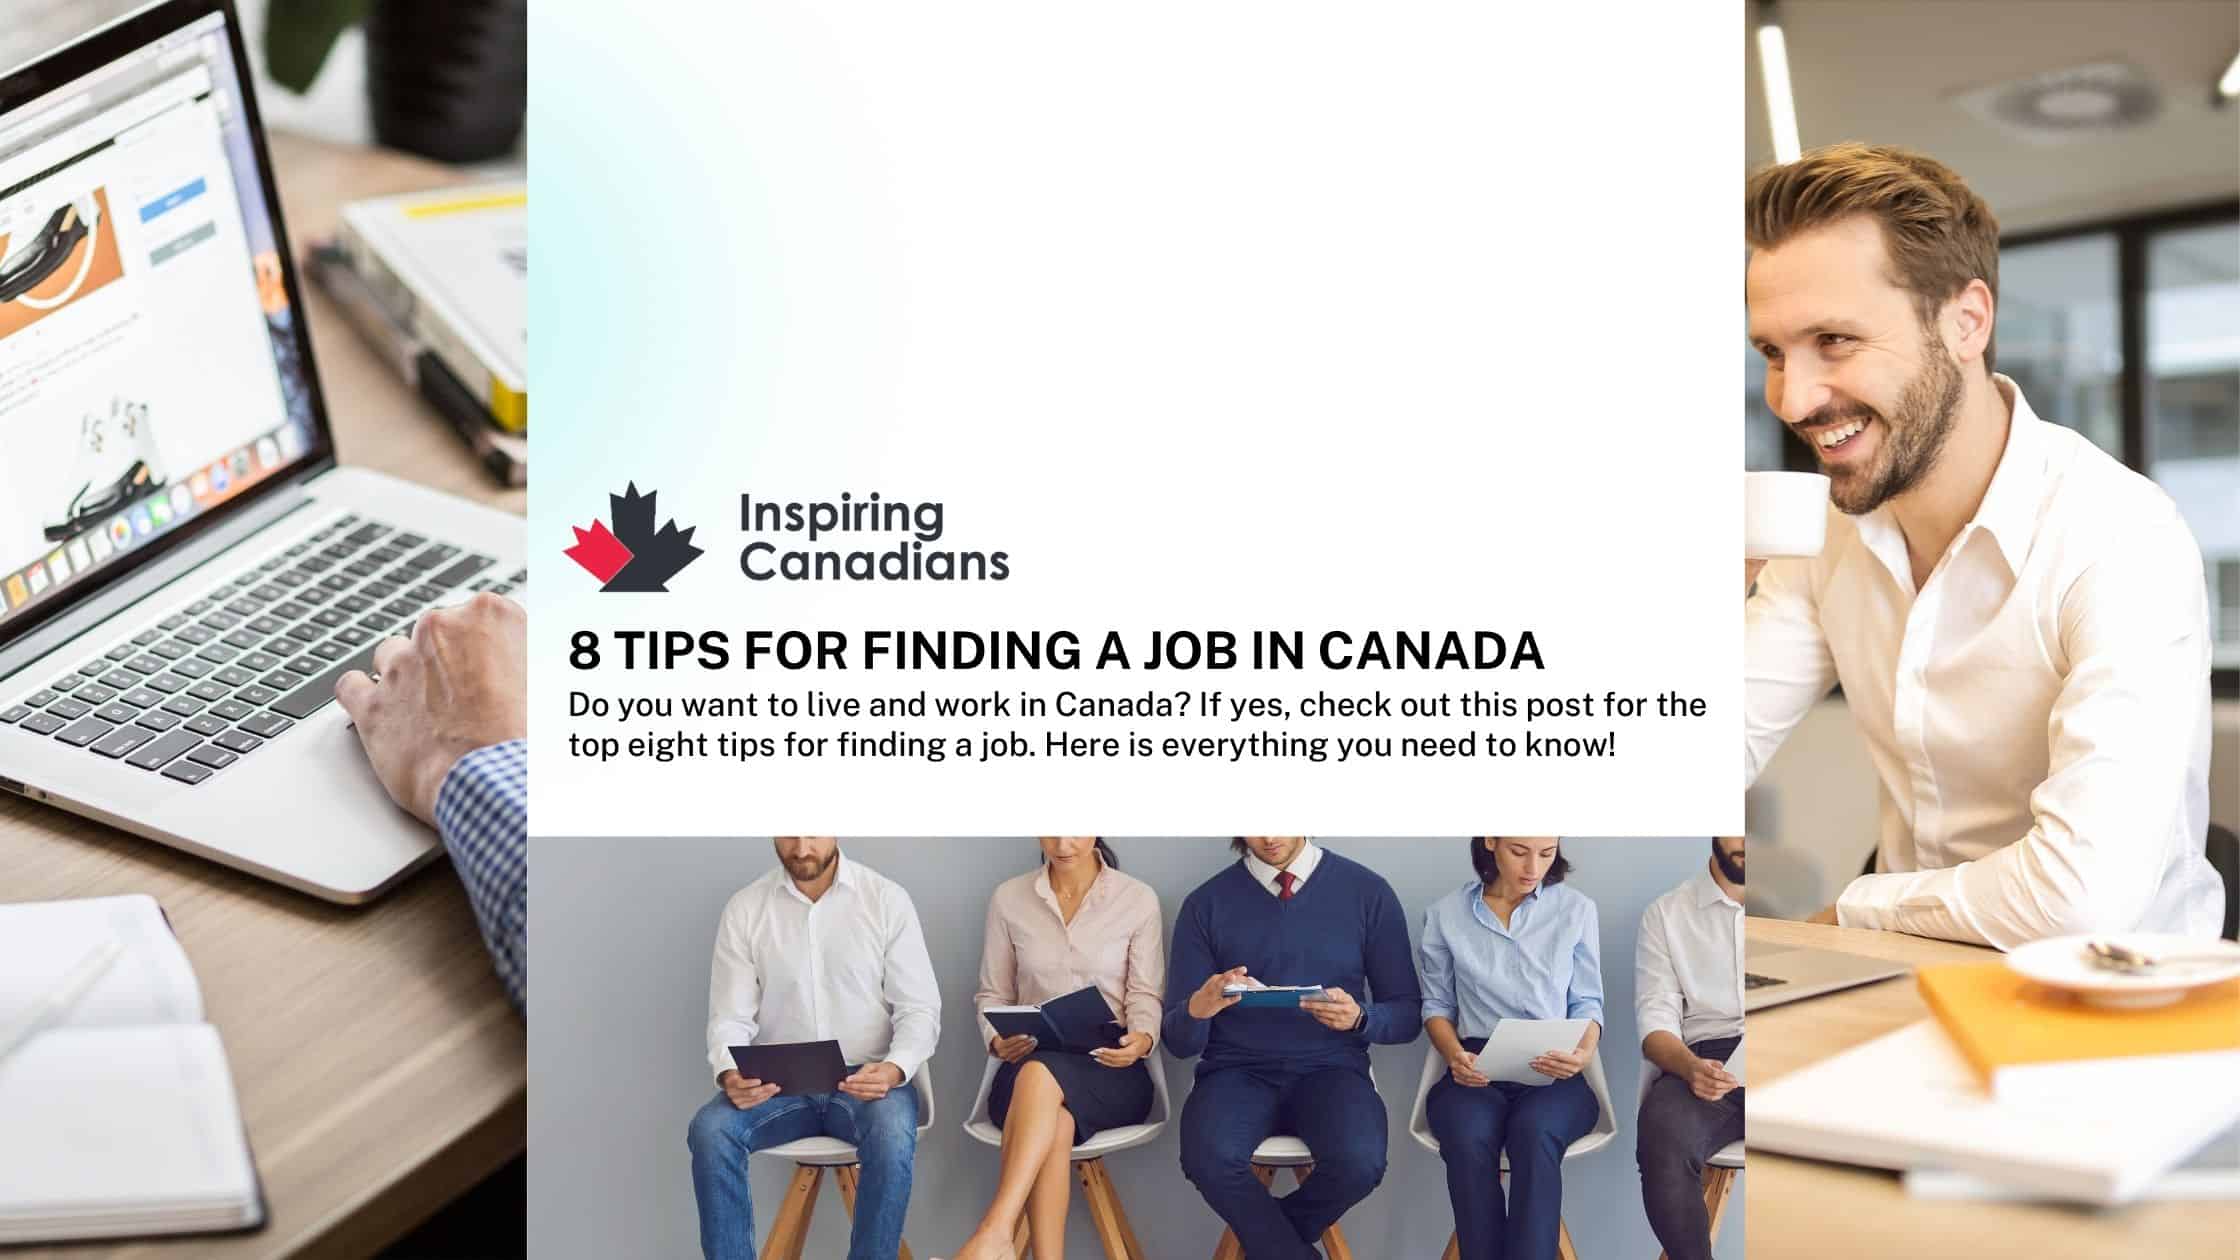 8 tips for finding a job in Canada